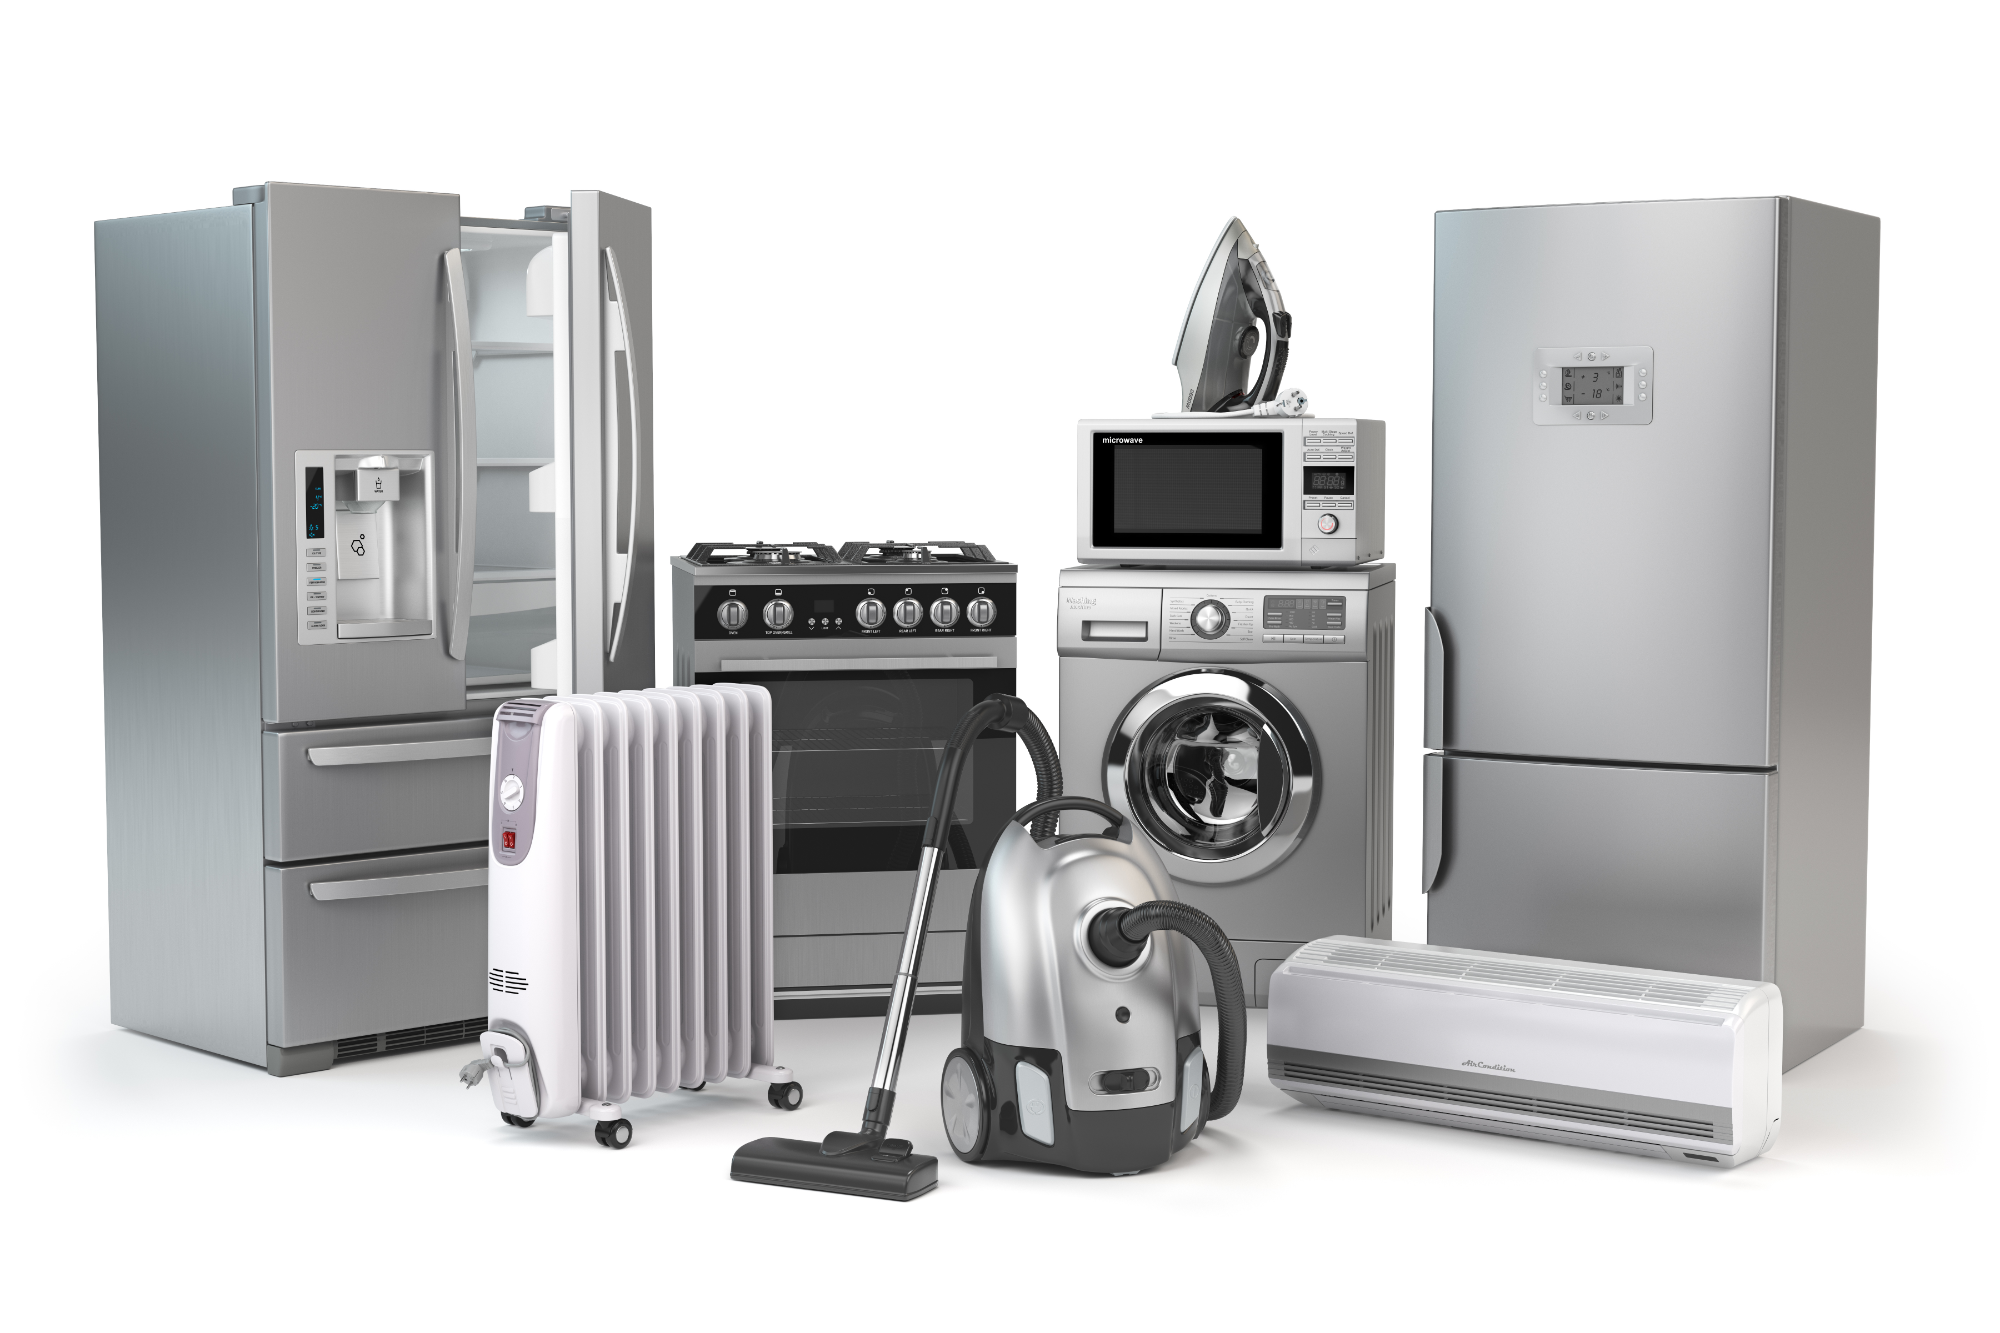 BEST APPLIANCE BRANDS : WHAT ARE THE BEST APPLIANCE BRANDS